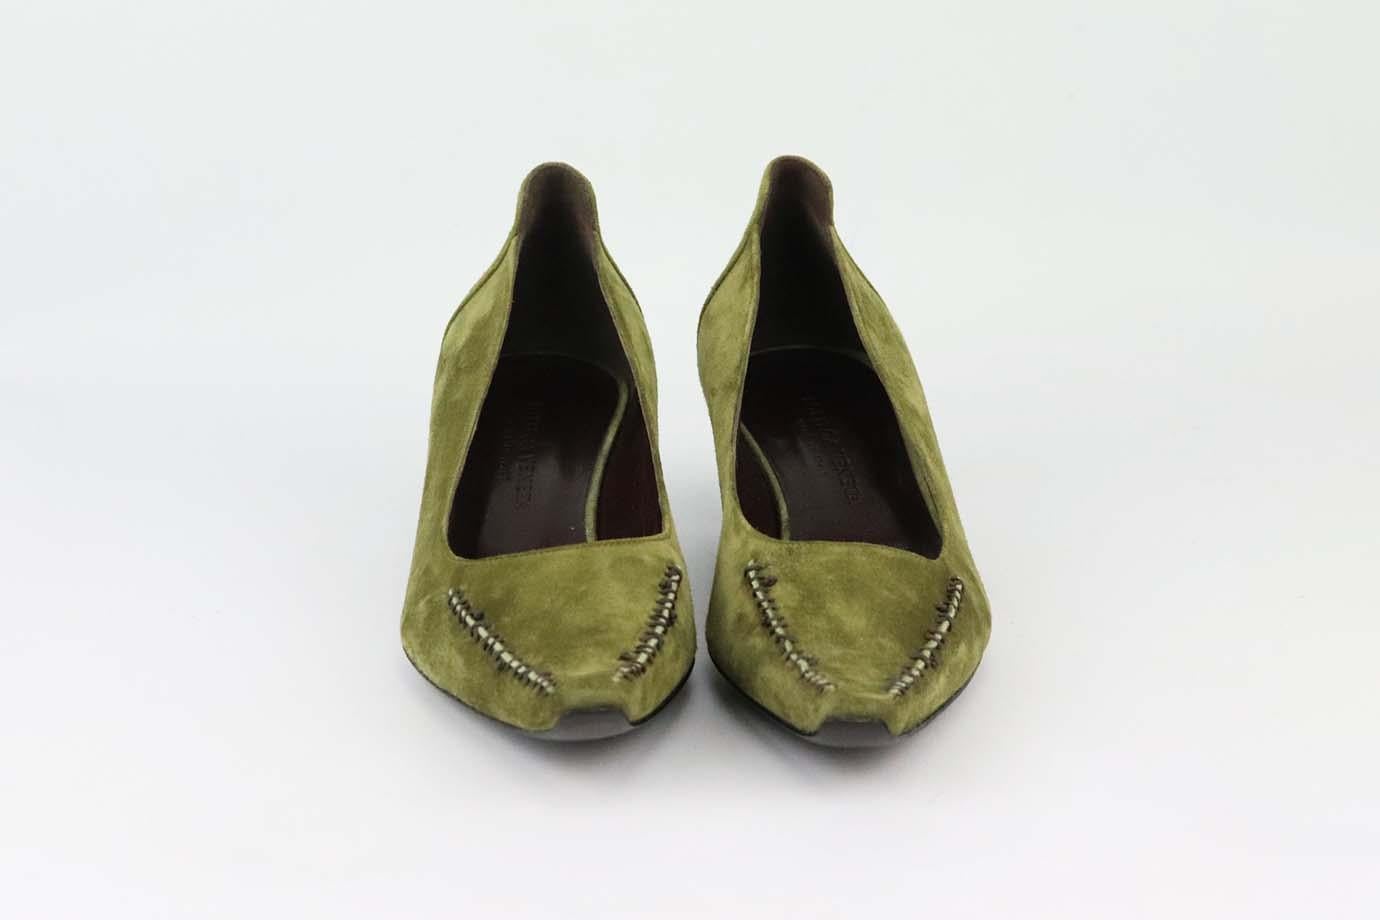 These Vintage pumps by Bottega Veneta are a classic style that will never date, made in Italy from supple green suede, they have pointed toes with whip stitched detail along the toe and comfortable 38 mm heels to take you from morning meetings to